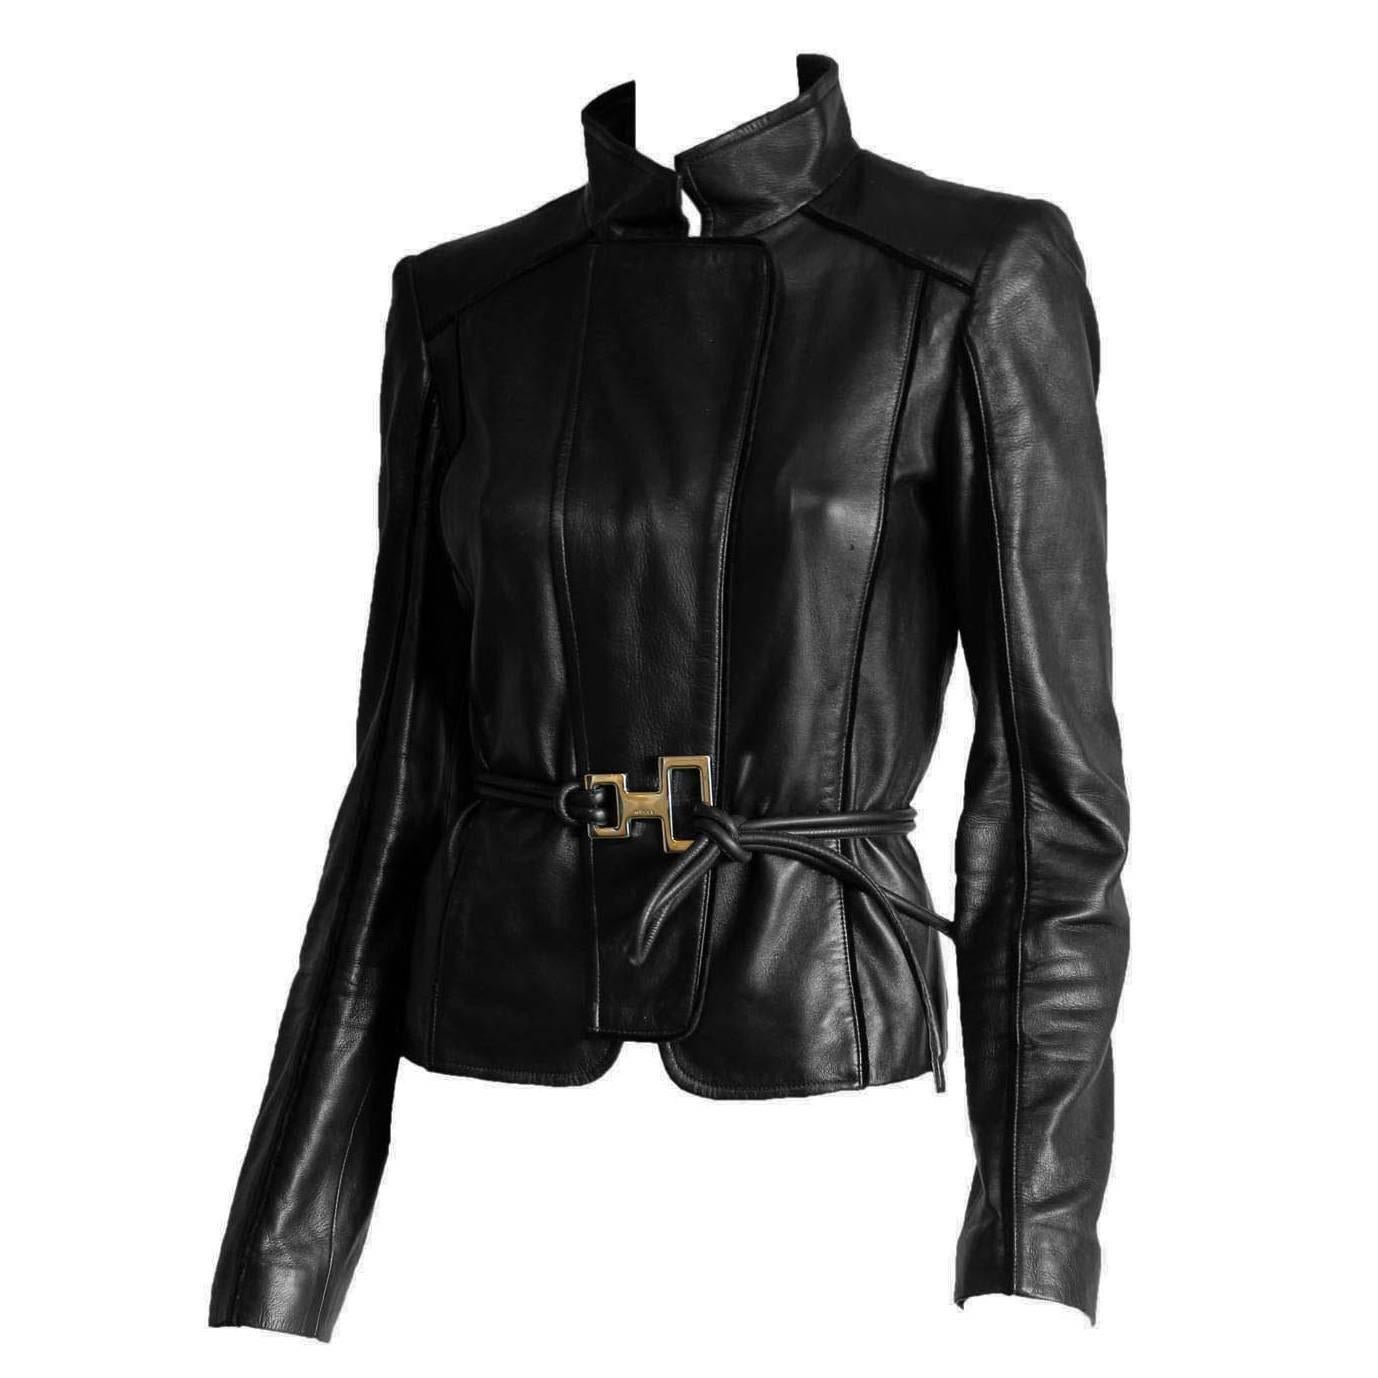 Free Shipping: Rare Tom Ford Gucci FW 2004 Black Leather Runway Moto Jacket! 42